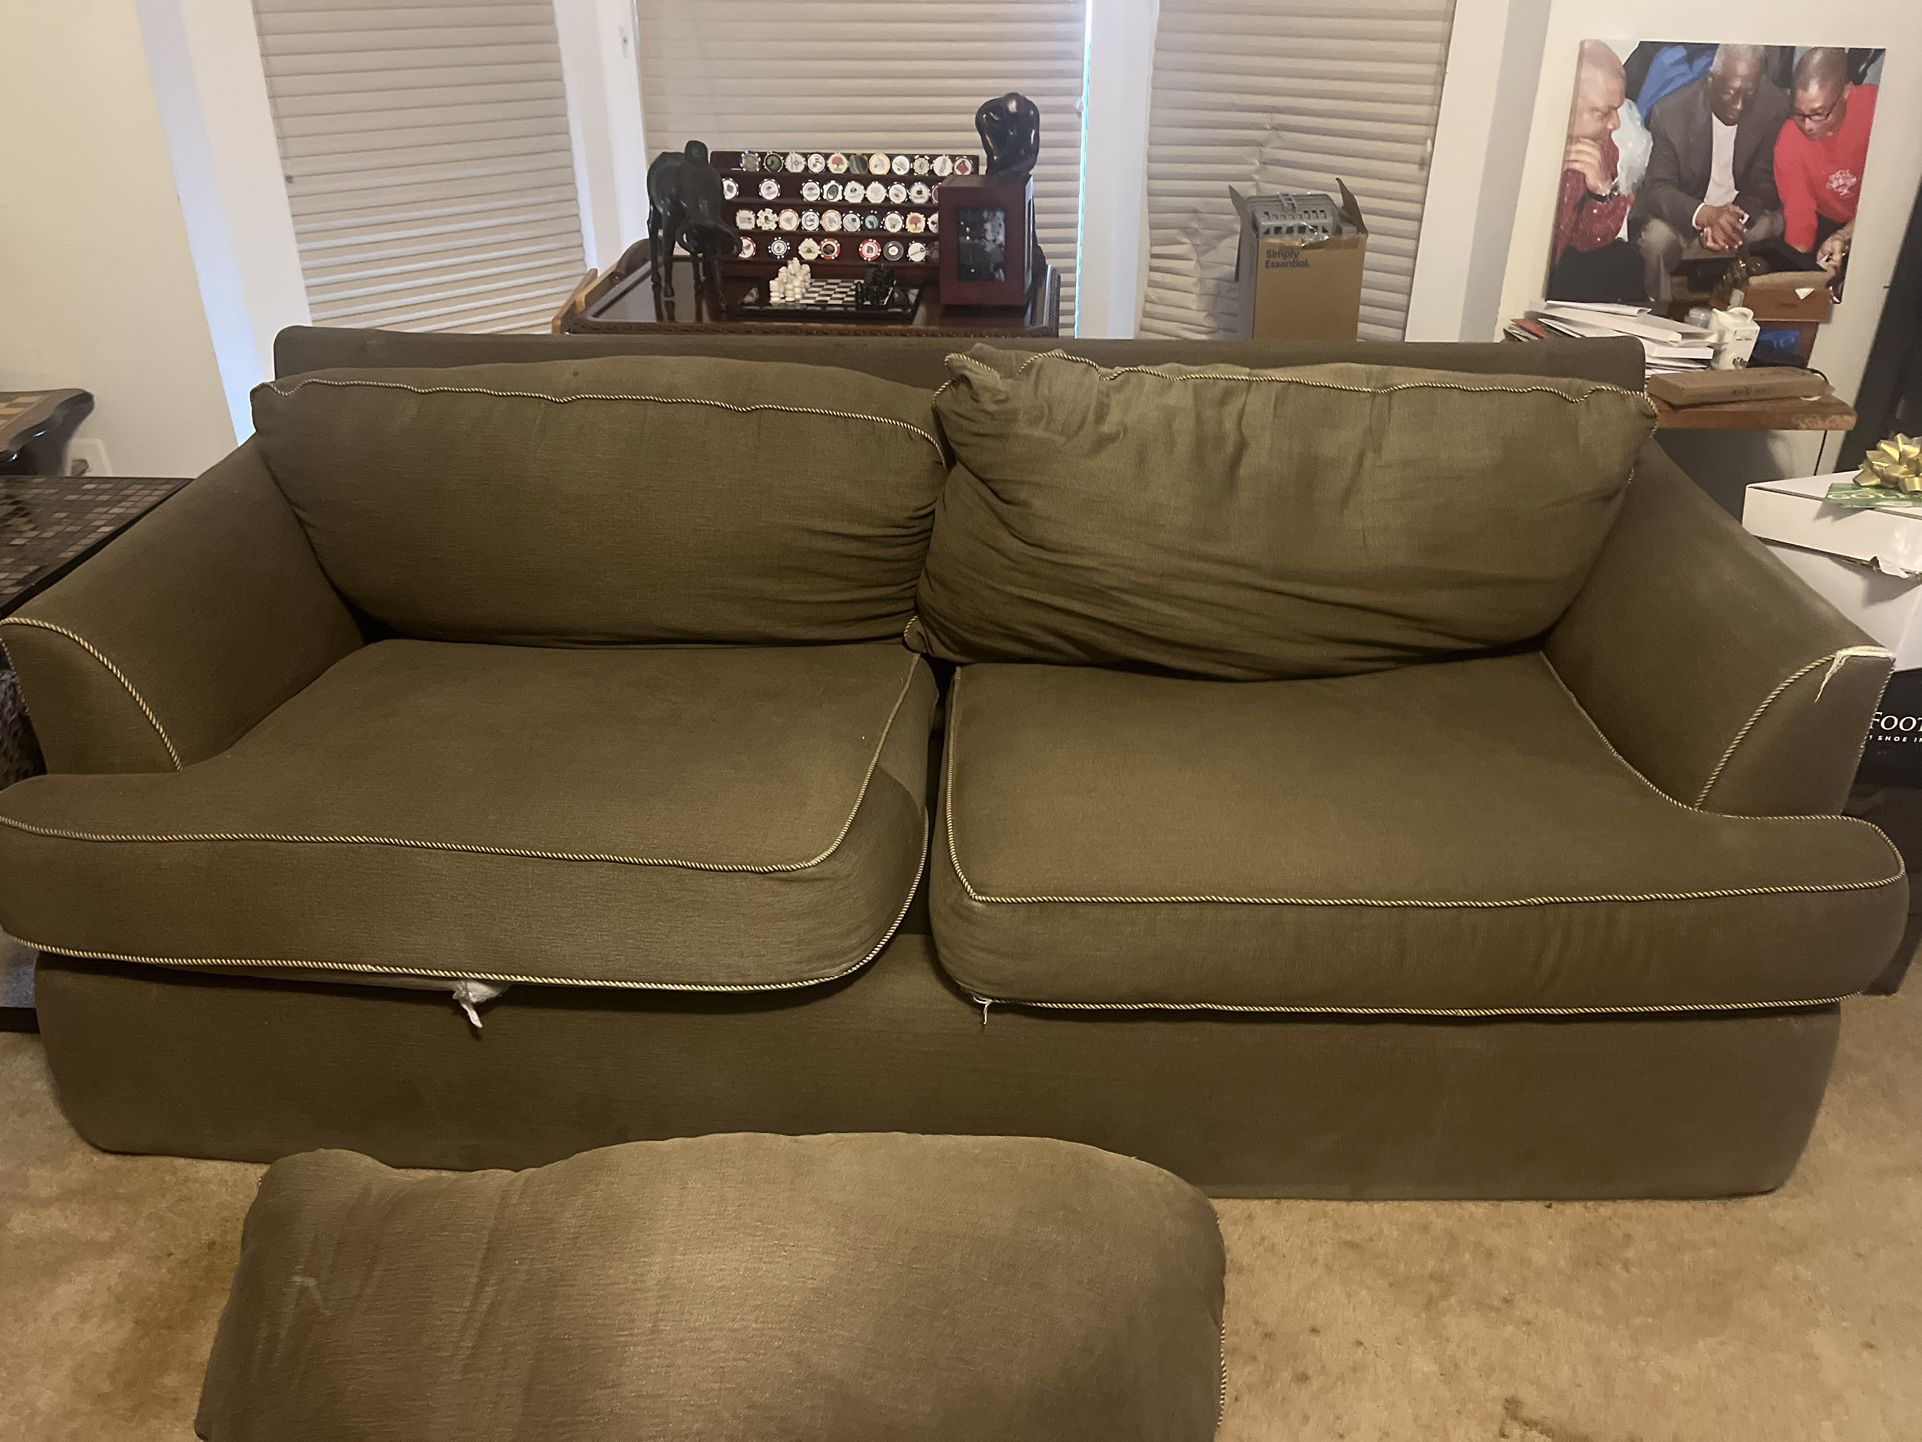 Used  Comfortable Loveseat  Available Cheap